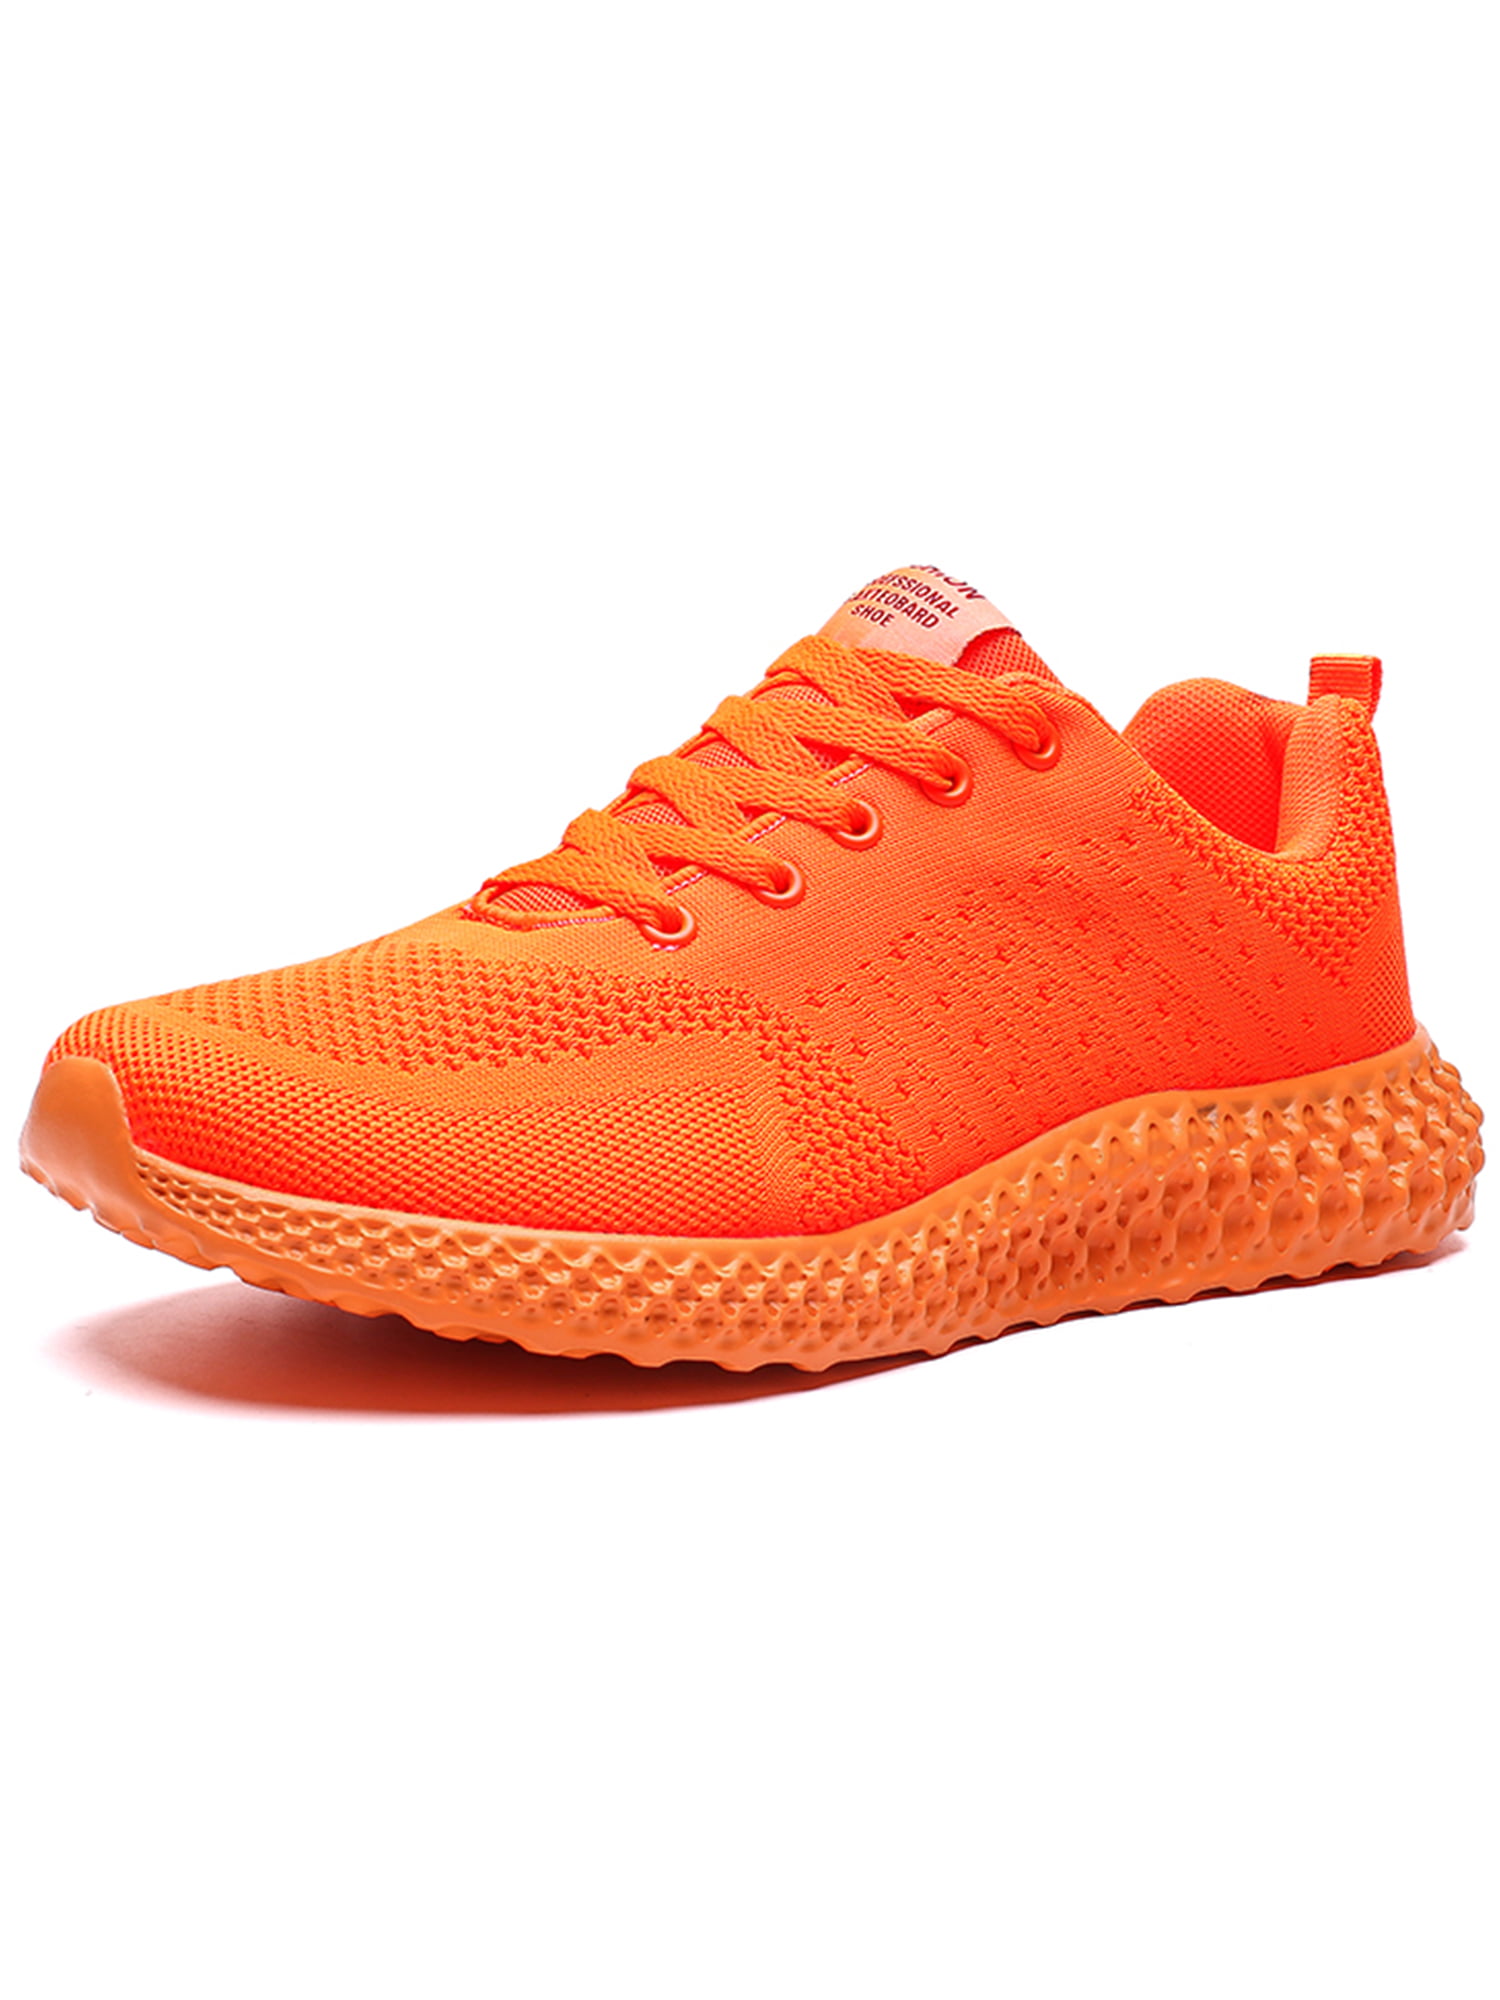 Mens Casual Athletic Sneakers Knit Running Shoes Tennis Shoe Baseball Jogging